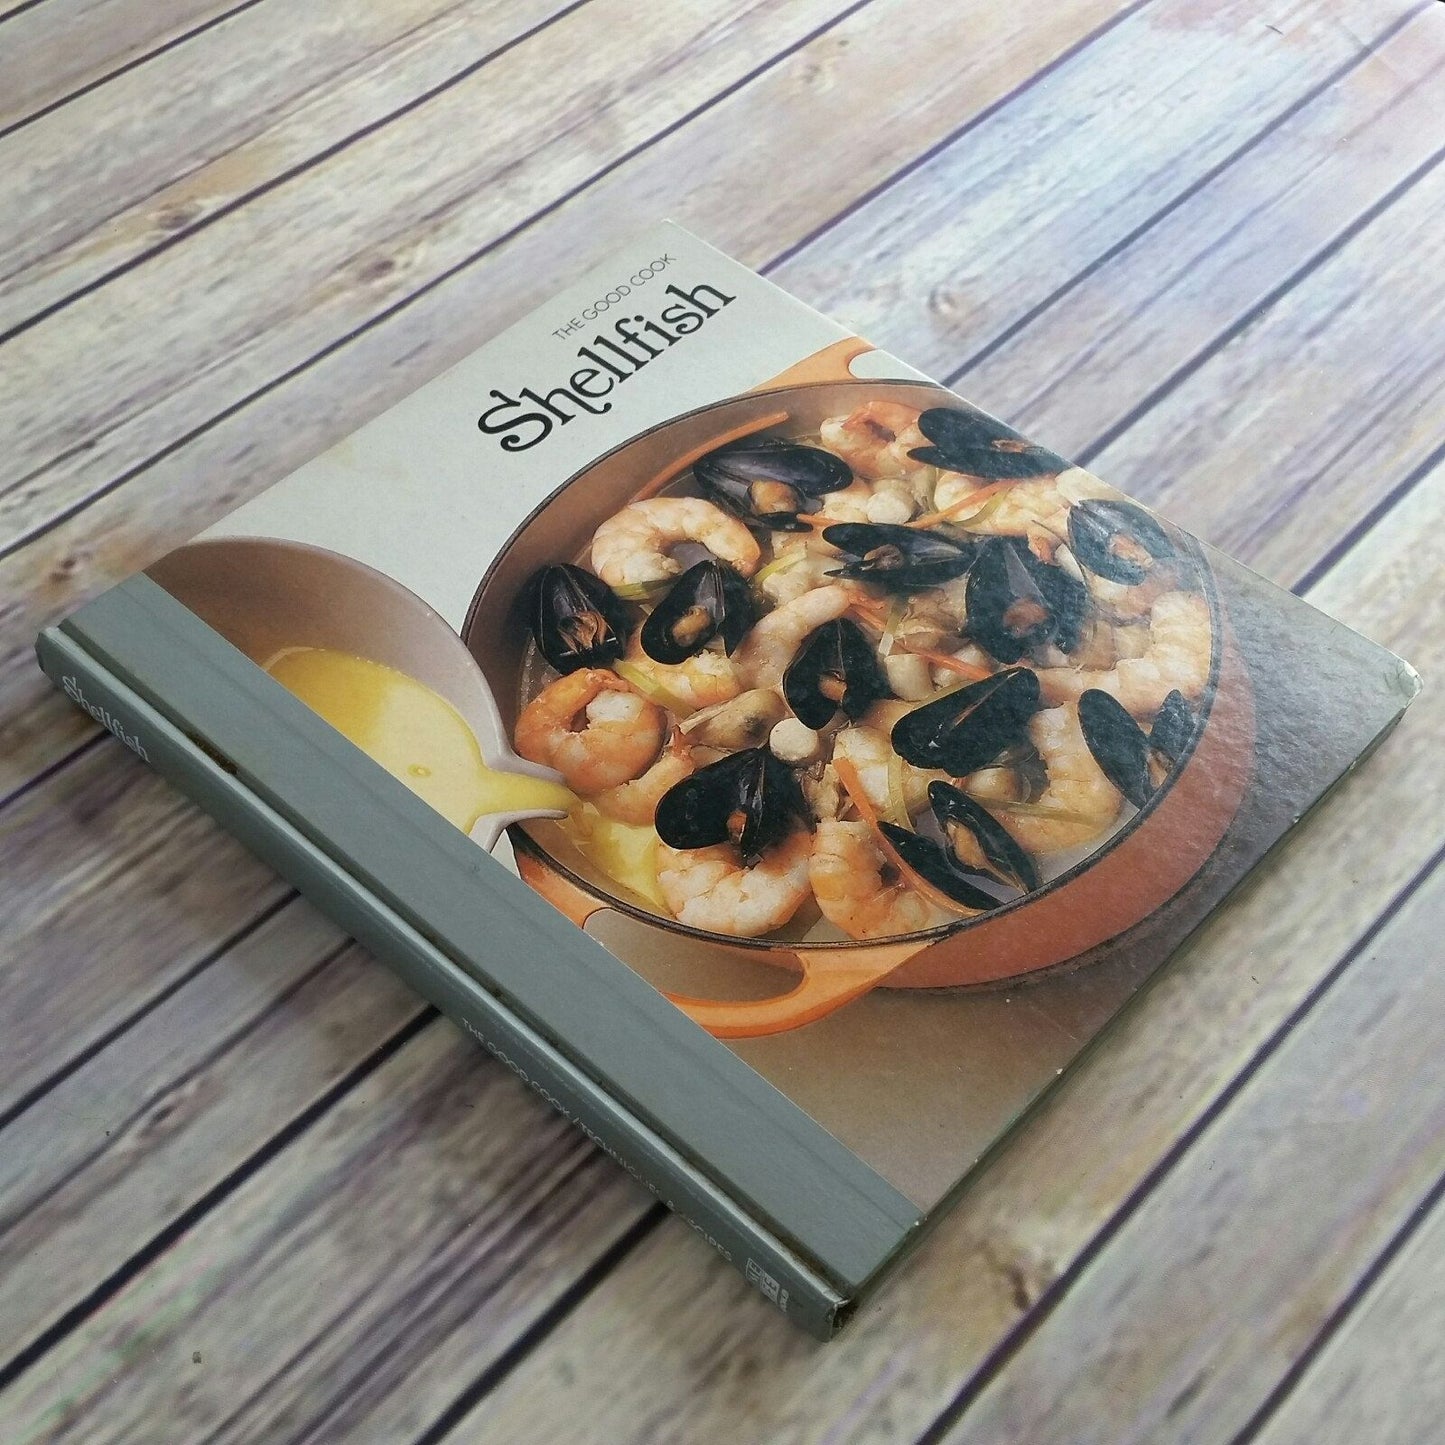 Vintage Cookbook Shellfish Time Life Books The Good Cook Techniques and Recipes 1982 Hardcover Poaching Stewing Frying Baking Broiling